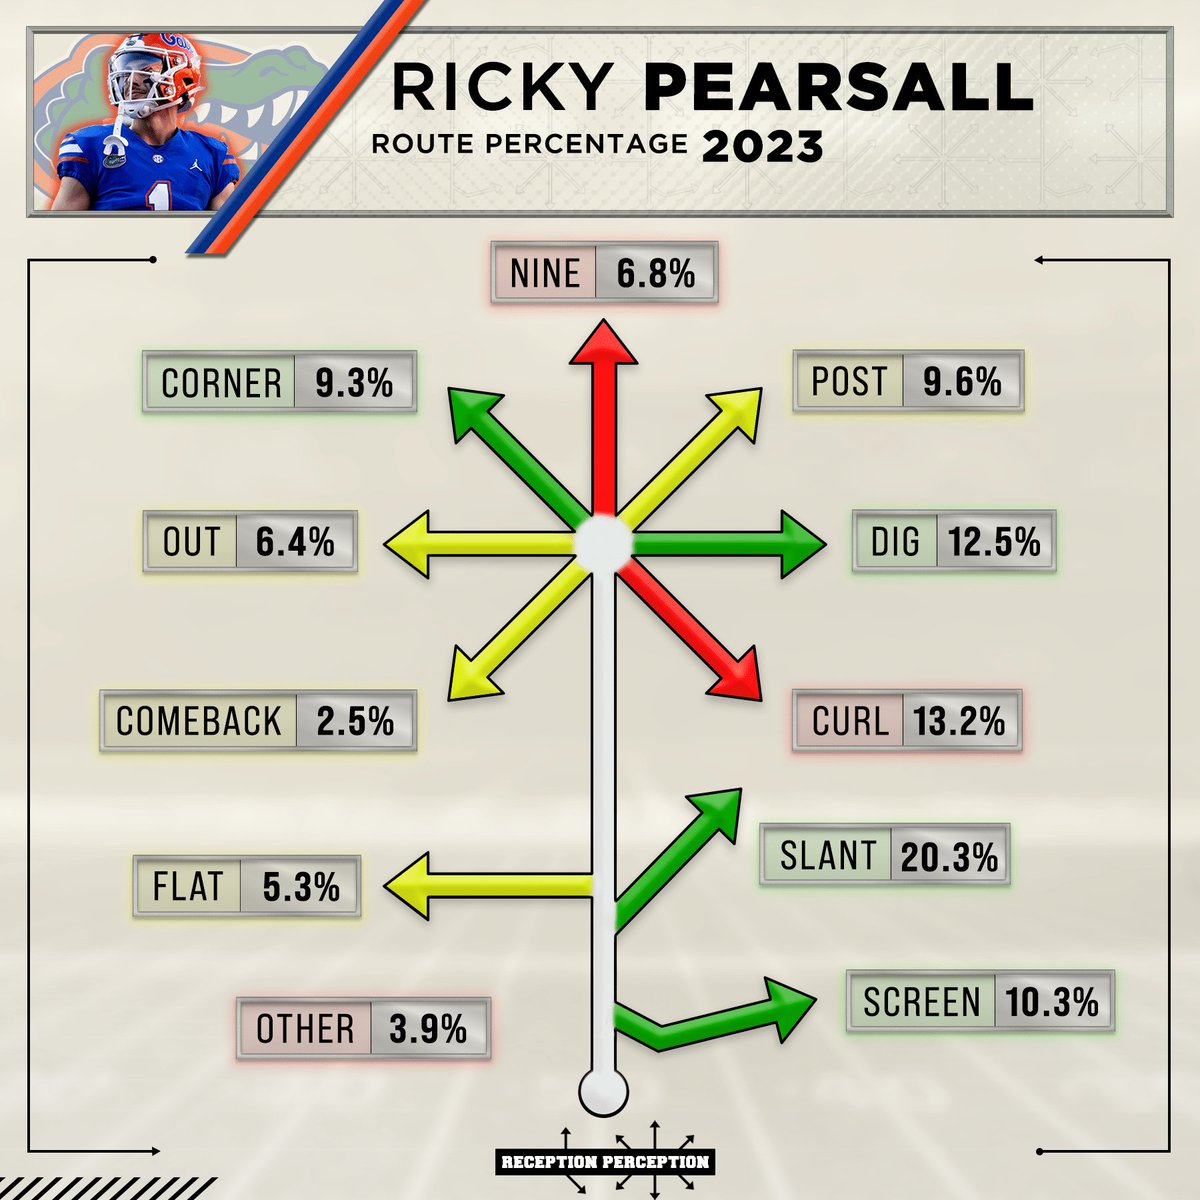 New 49ers WR Ricky Pearsall had the second-highest success rate vs. man coverage (75.8%) among the prospects I charted for #ReceptionPerception. 

His full RP profile shows a well-rounded wide receiver who can get open on his own and play multiple spots. I had him ranked right